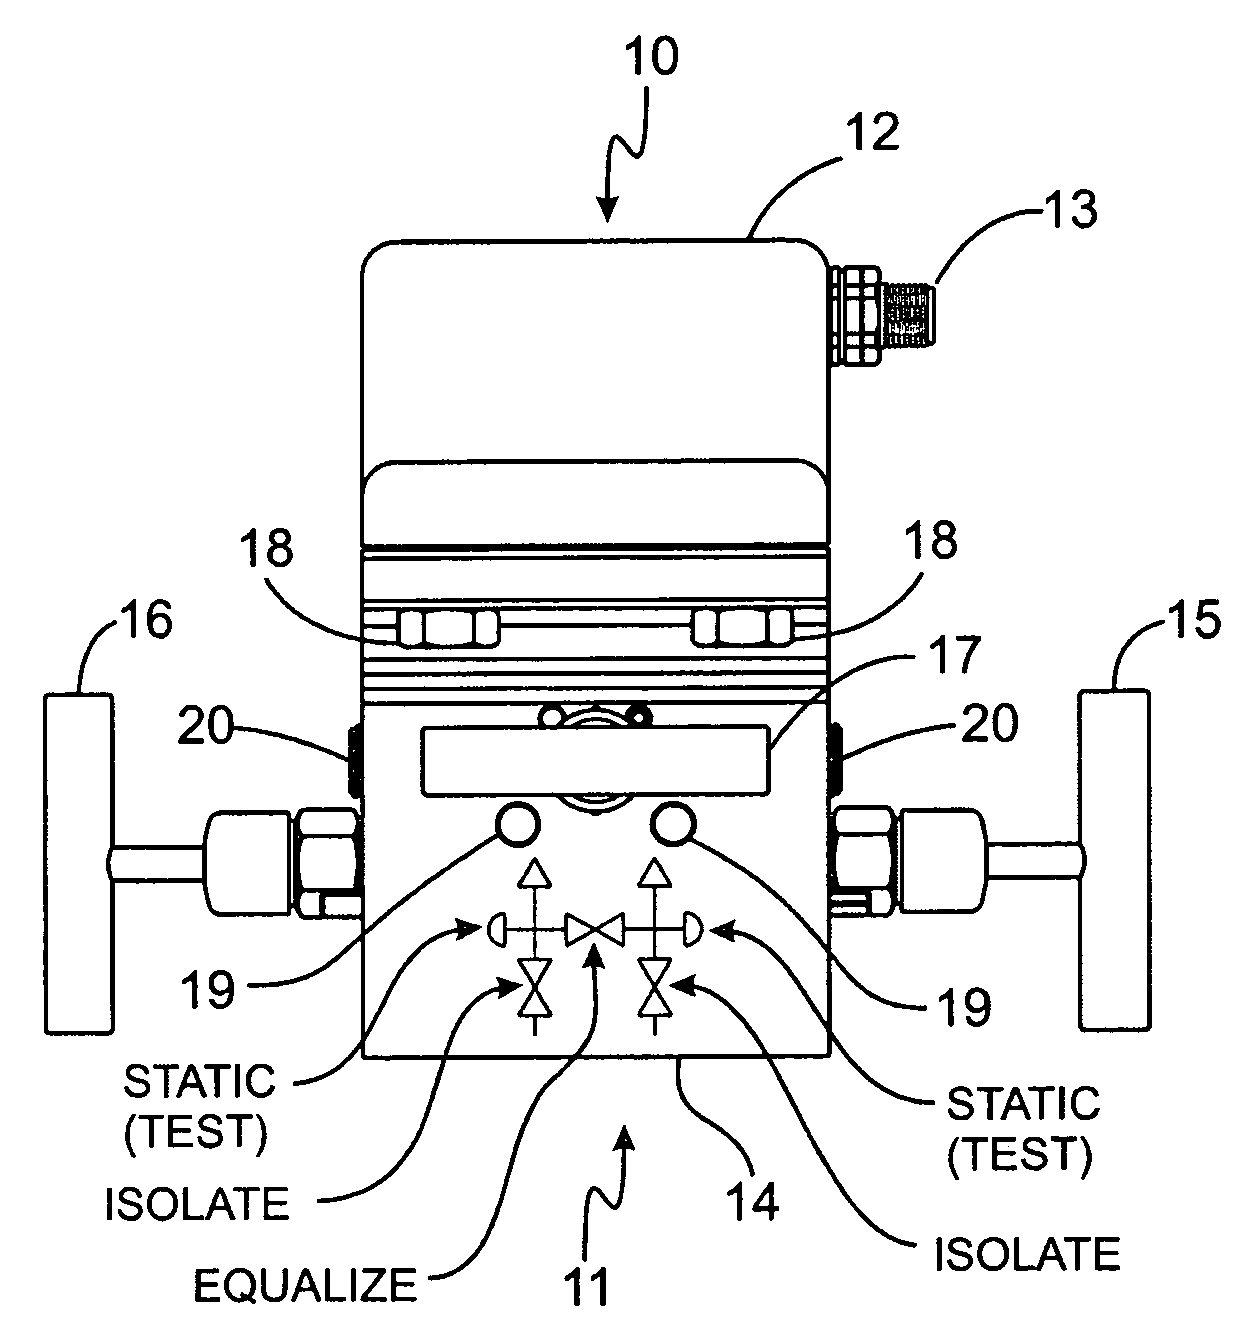 Manifold valve and pressure transducer assembly